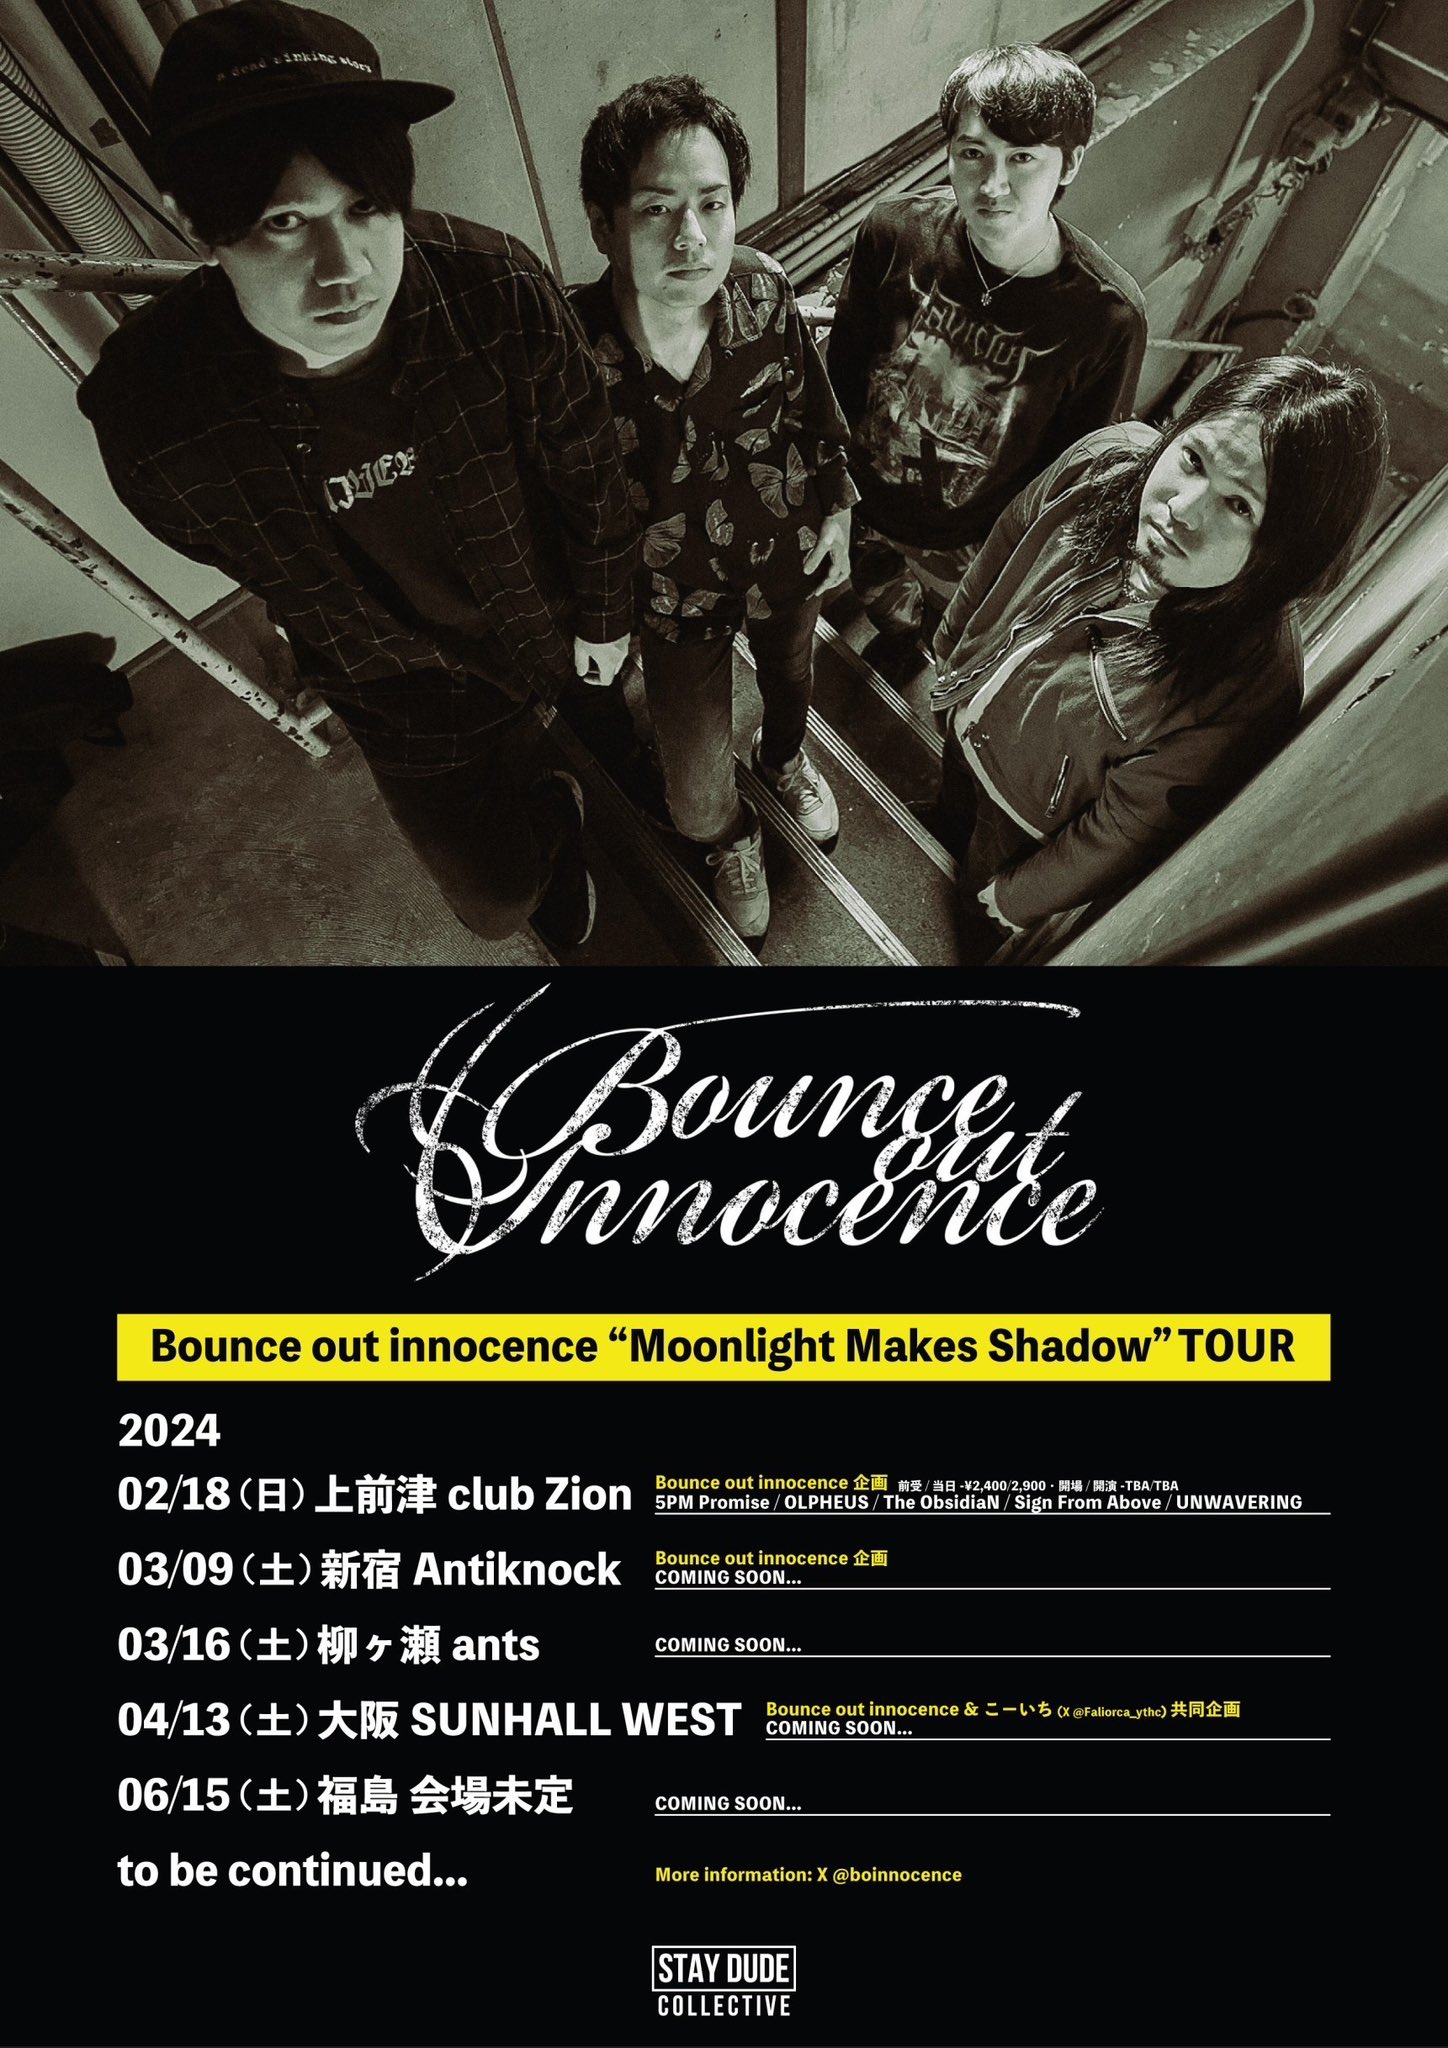 Bounce out innocence “Moonlight Makes Shadow” TOUR